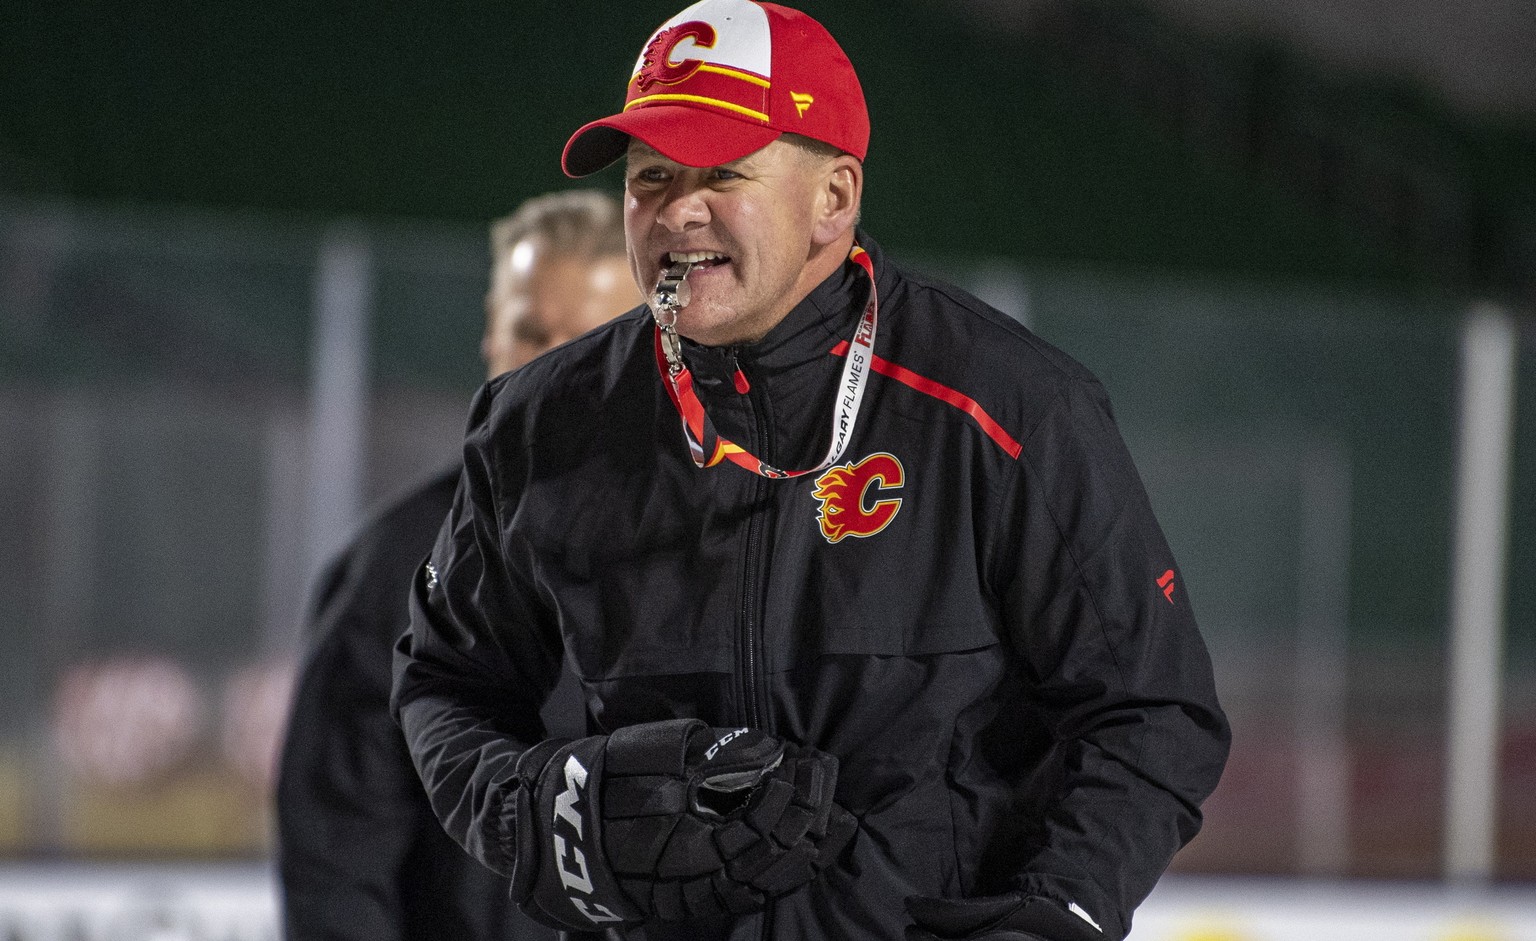 FILE - In this Oct. 25, 2019, file photo, Calgary Flames coach Bill Peters watches practice in Regina, Saskatchewan, ahead of the NHL Heritage Classic outdoor hockey game against the Winnipeg Jets. Ca ...